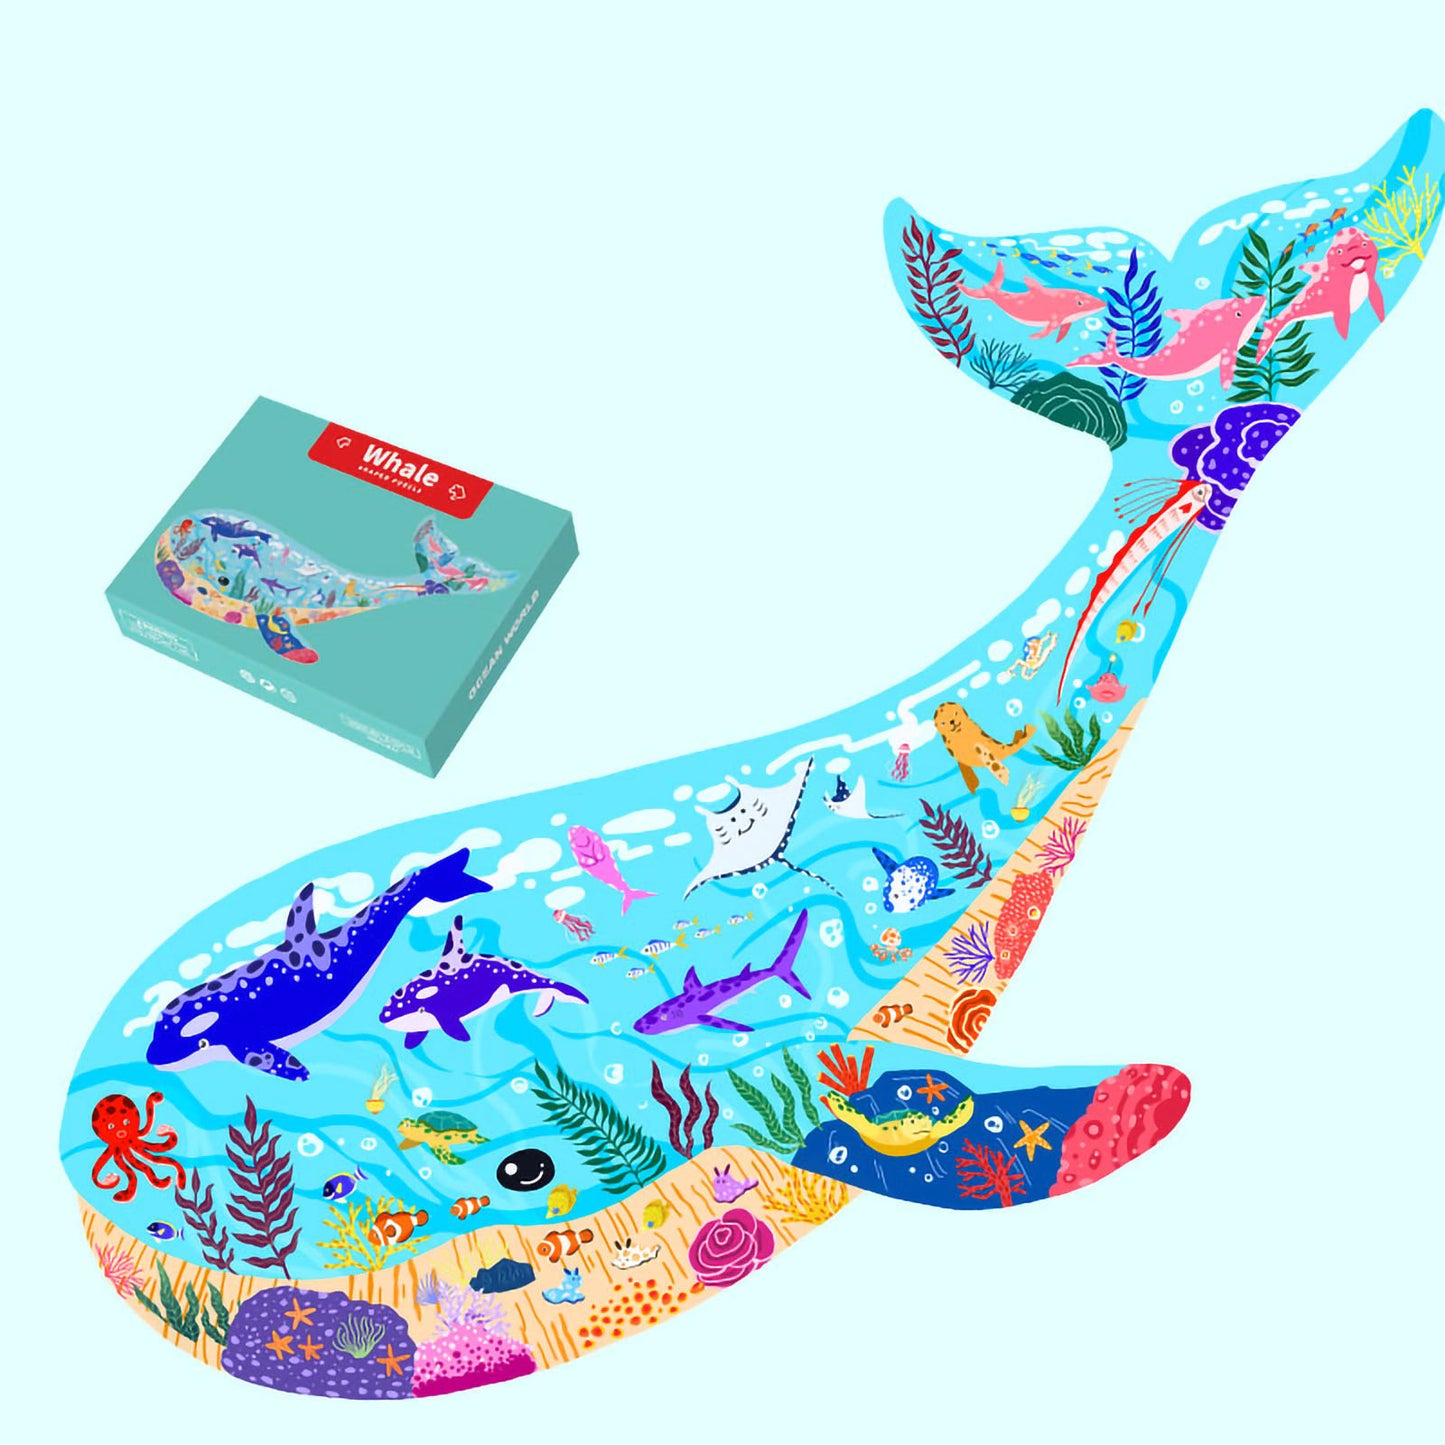 NOOLY 50 Pieces Animal Shaped Jigsaw Puzzles YXPT-01 (Whale)